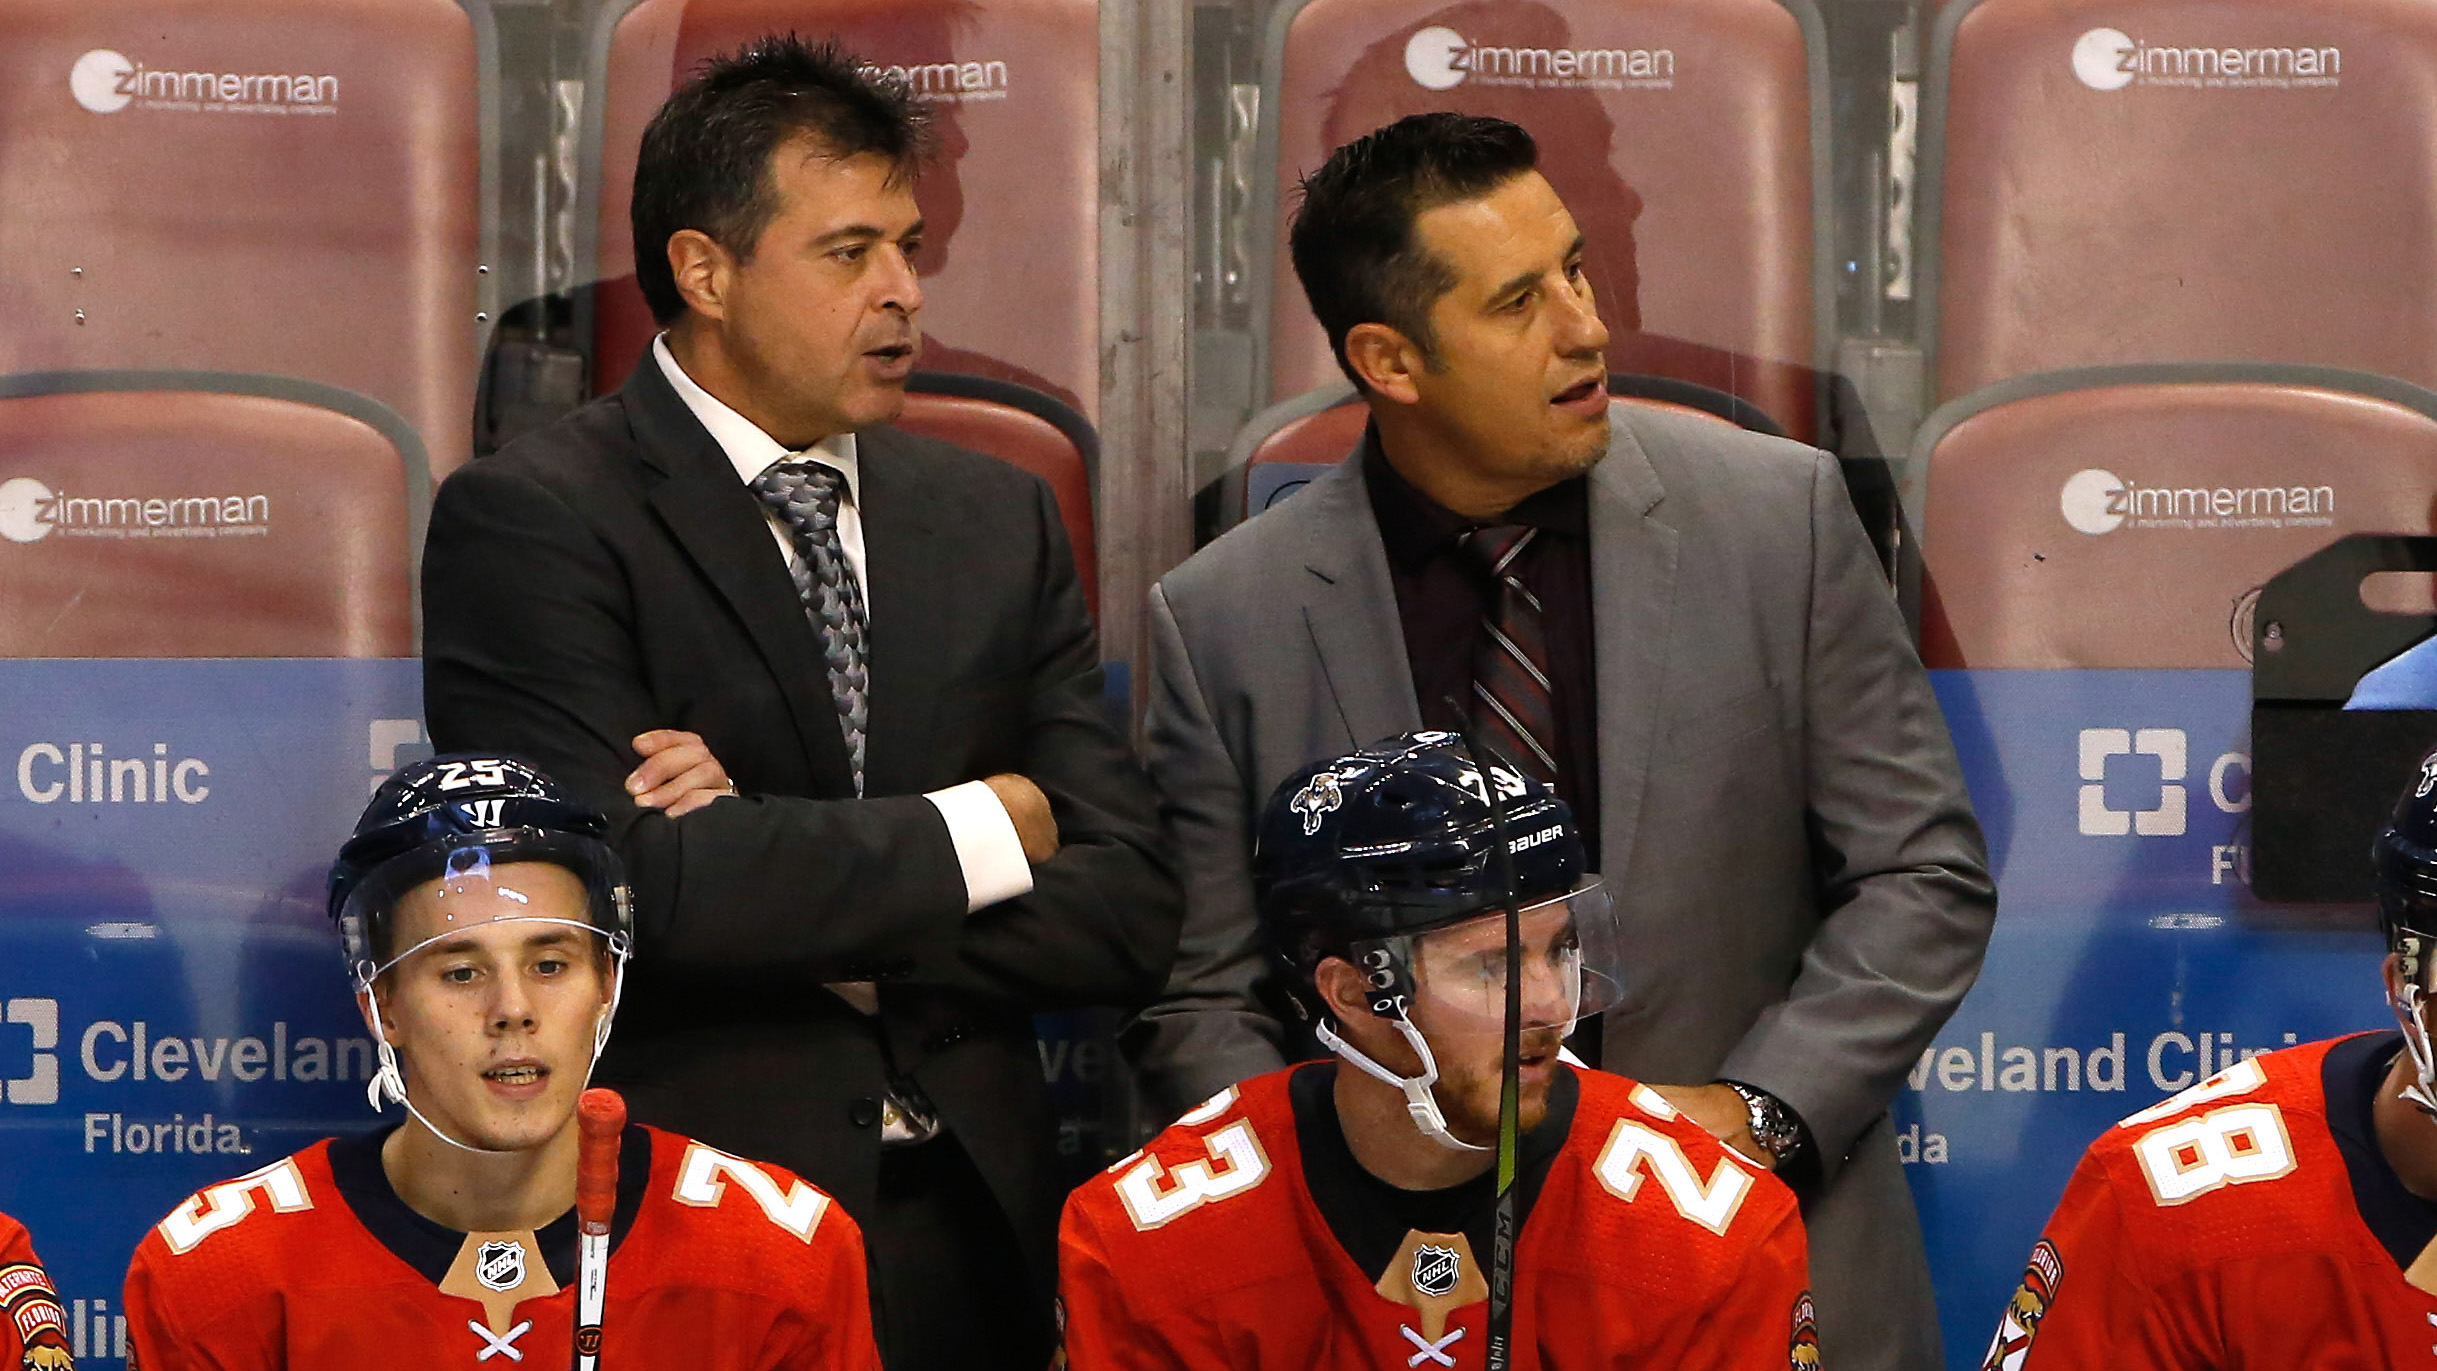 Sep 28, 2017; Sunrise, FL, USA; Florida Panthers head coach Bob Boughner (right) and assistant coach Jack Capuano (left) during the second period of a game against the Tampa Bay Lightning at BB&T Center. Mandatory Credit: Robert Mayer-USA TODAY Sports